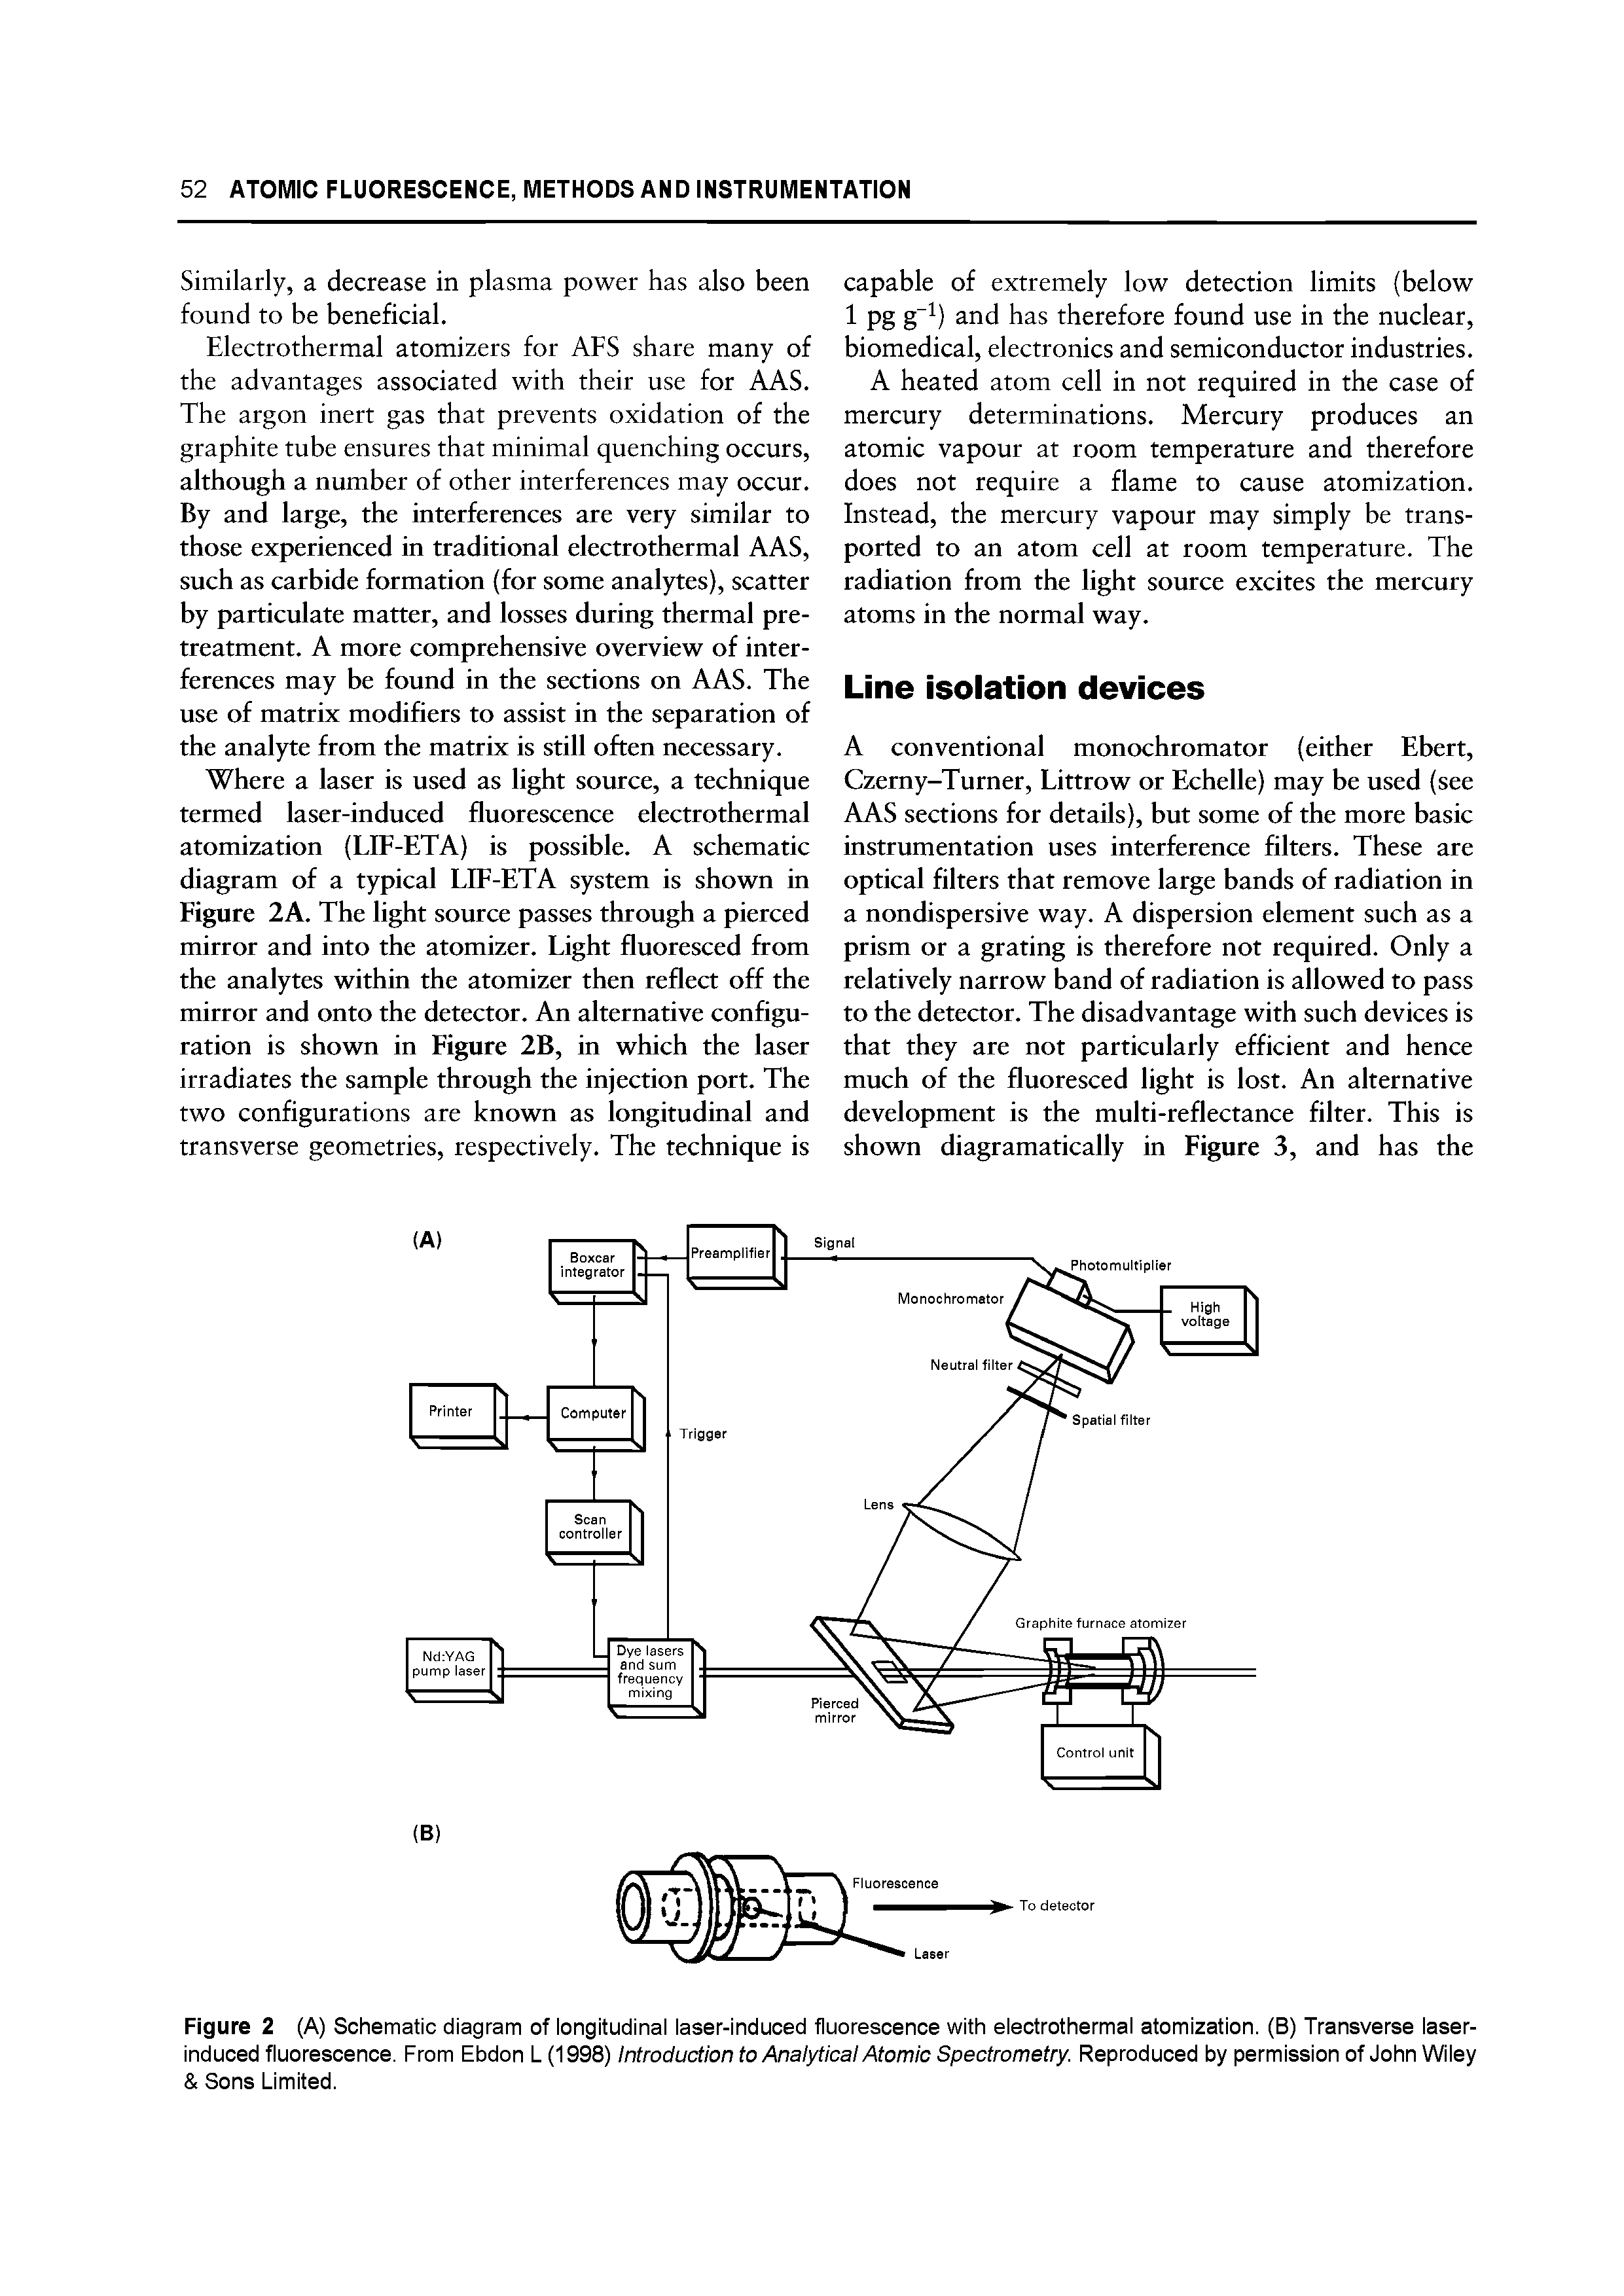 Figure 2 (A) Schematic diagram of longitudinal laser-induced fluorescence with electrothermal atomization. (B) Transverse laser-induced fluorescence. From Ebdon L (1998) Introduction to Analytical Atomic Spectrometry. Reproduced by permission of John Wiley Sons Limited.